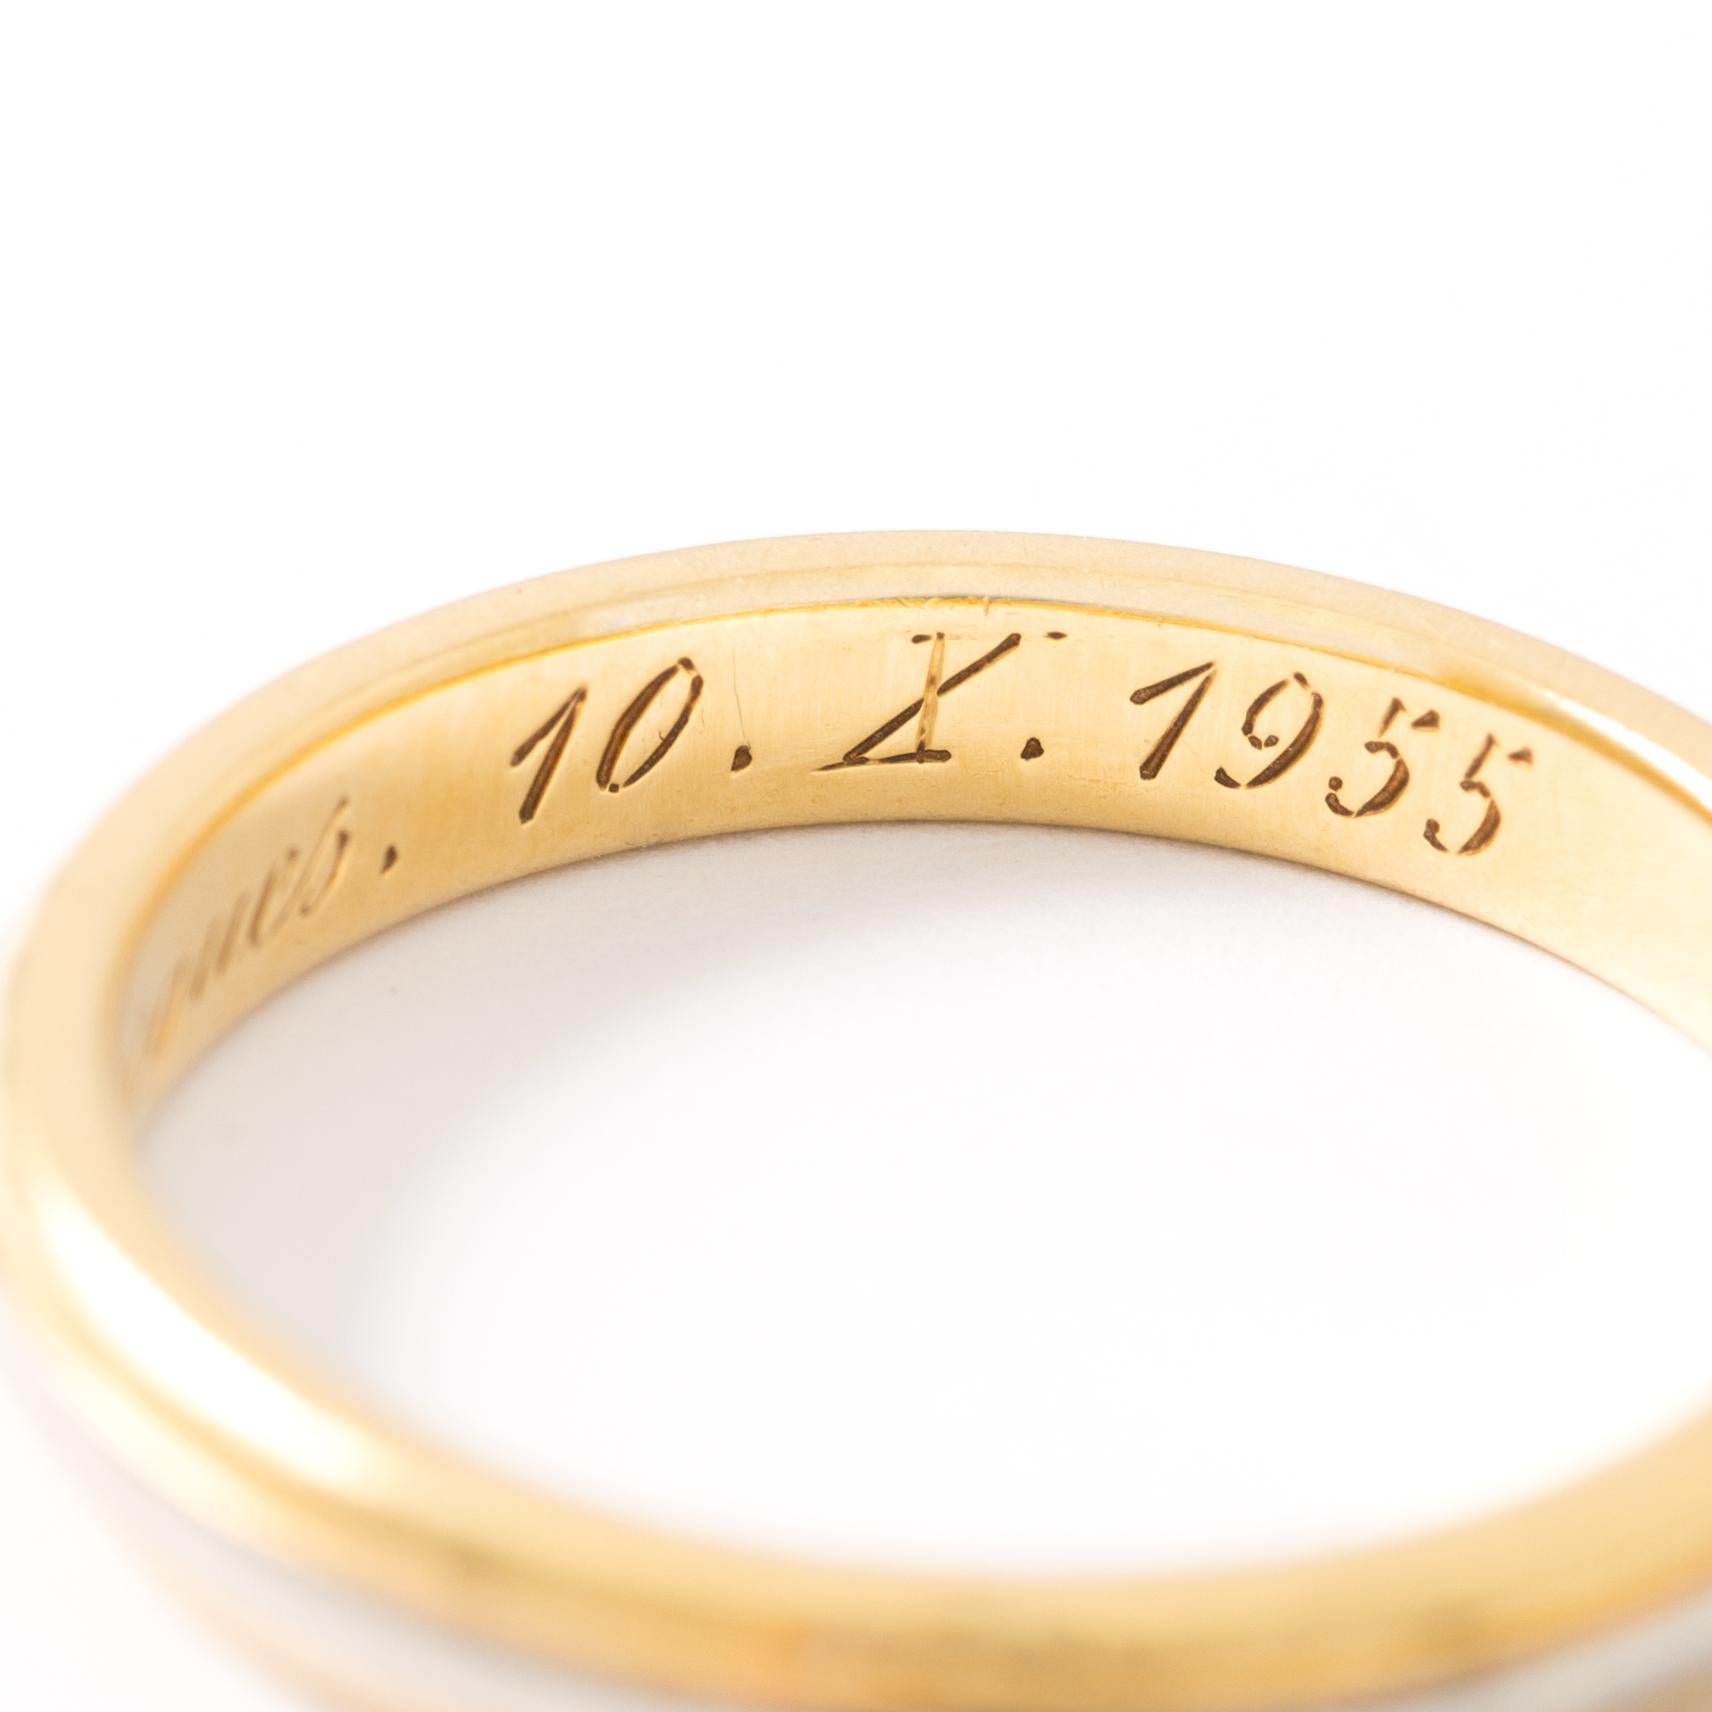 Women's or Men's Gold Band Ring For Sale